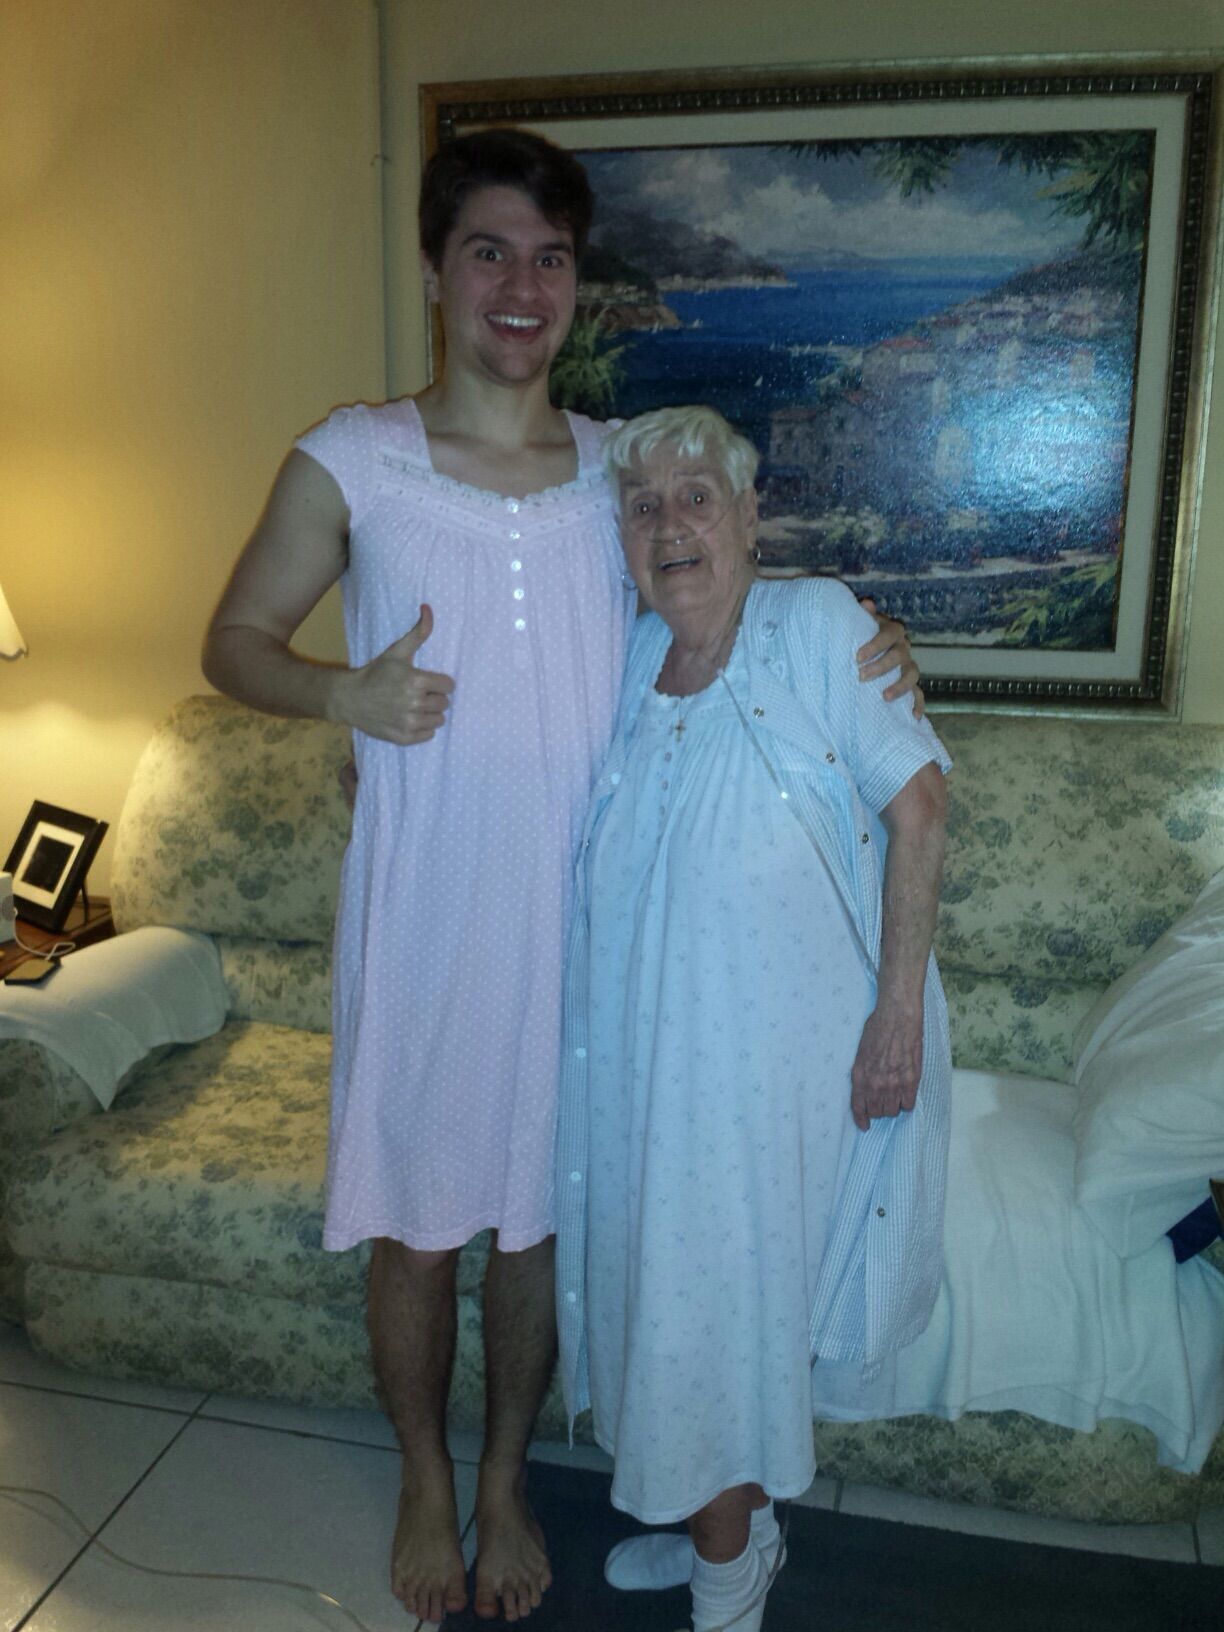 Granny Night- Dress Up Like Old Ladies And Let Loose